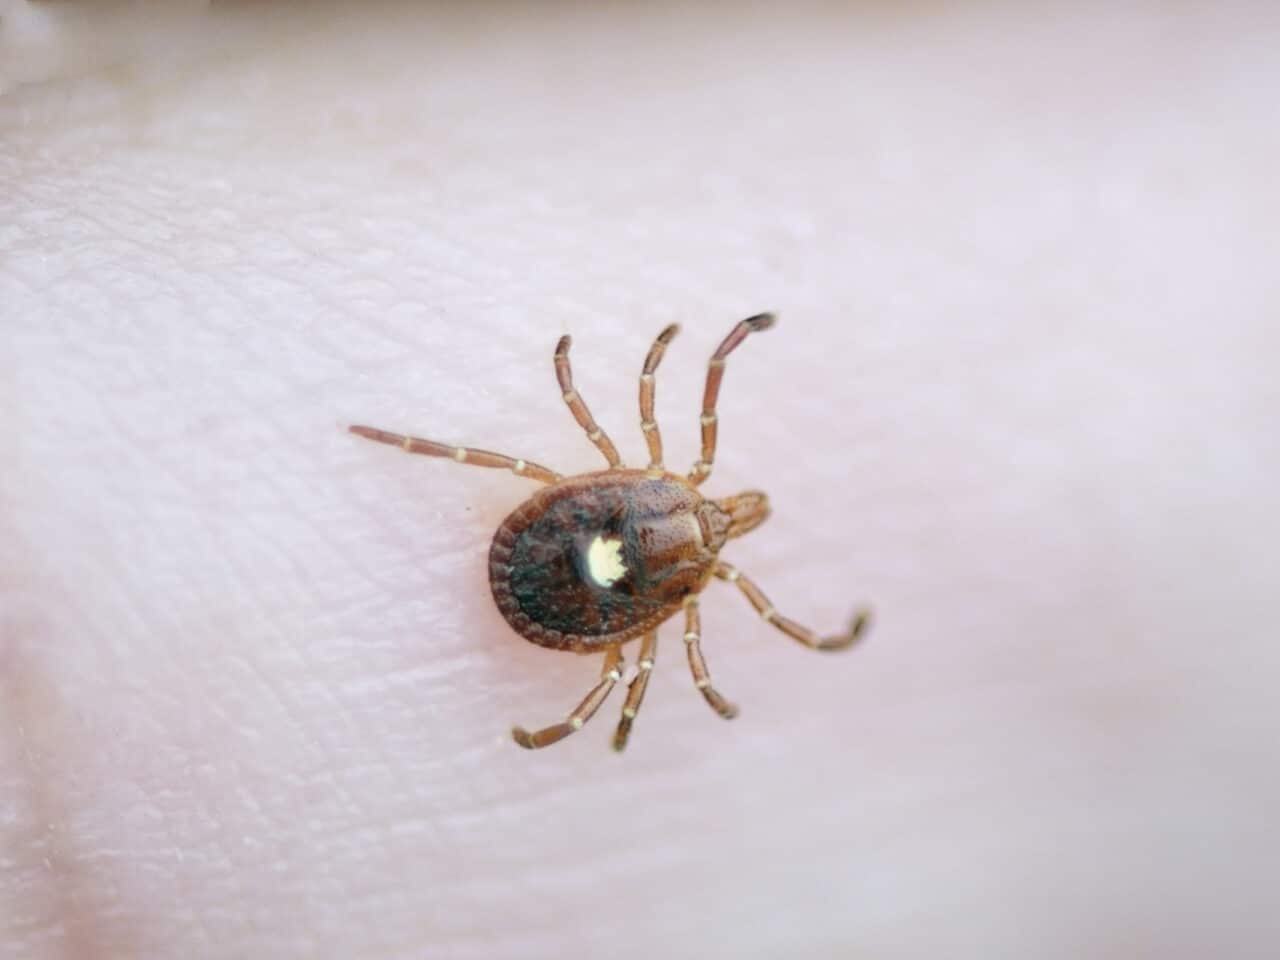 a lone star tick sits on the palm of someone's hand